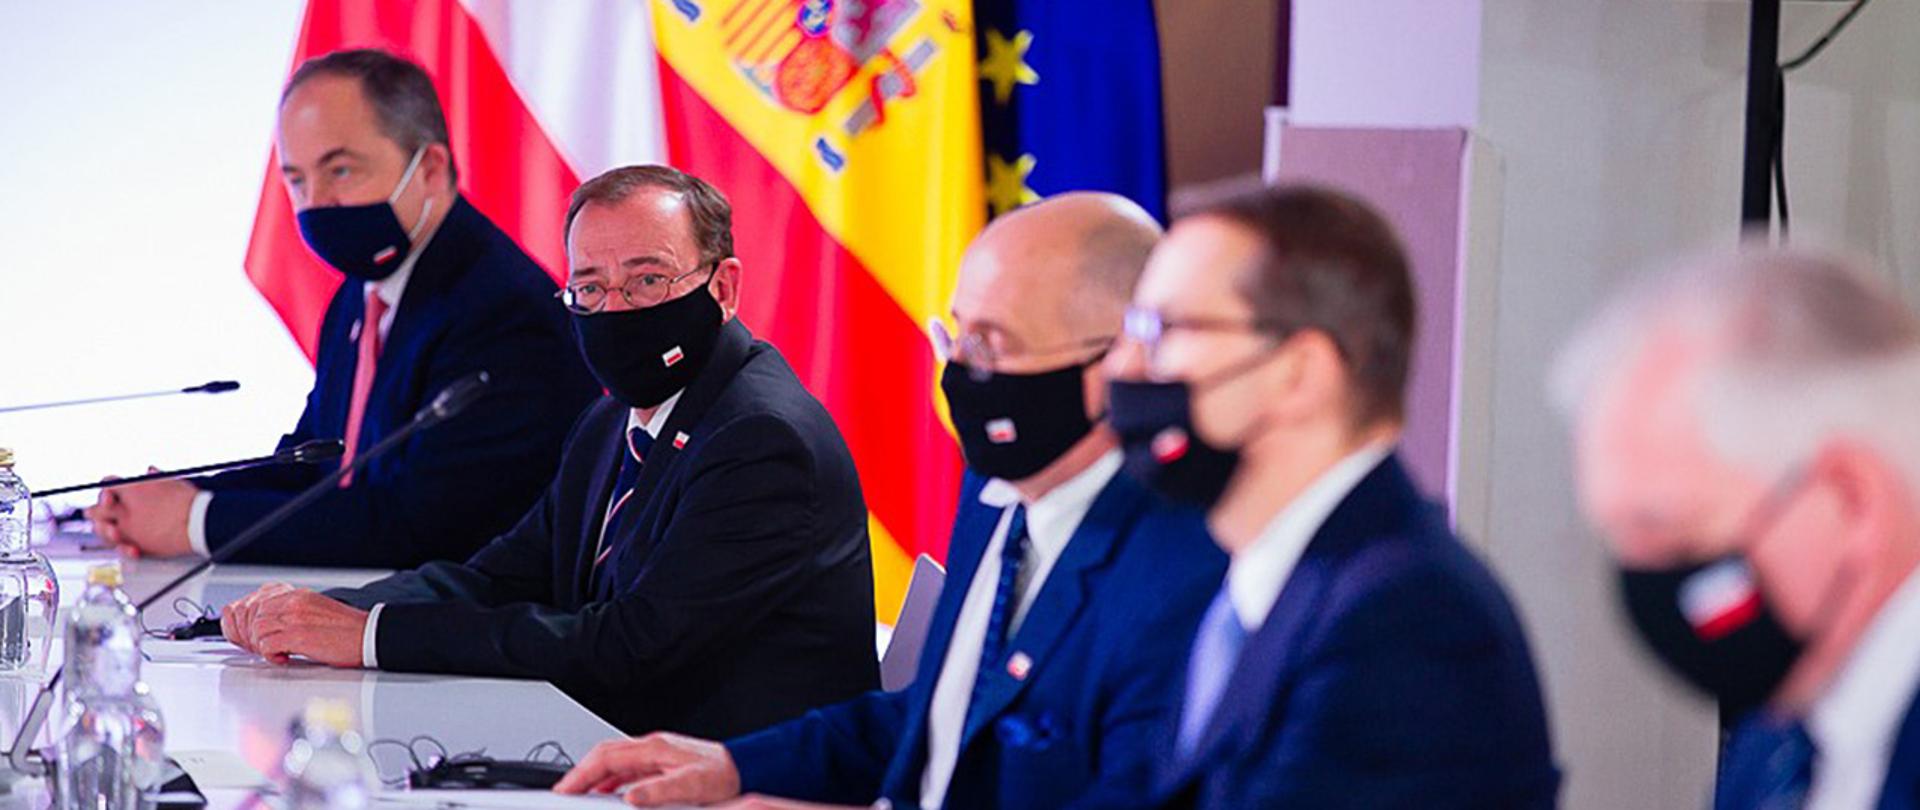 Minister Mariusz Kamiński attends the plenary session of the Polish-Spanish intergovernmental consultations chaired by Prime Ministers Mateusz Morawiecki and Pedro Sánchez.
.